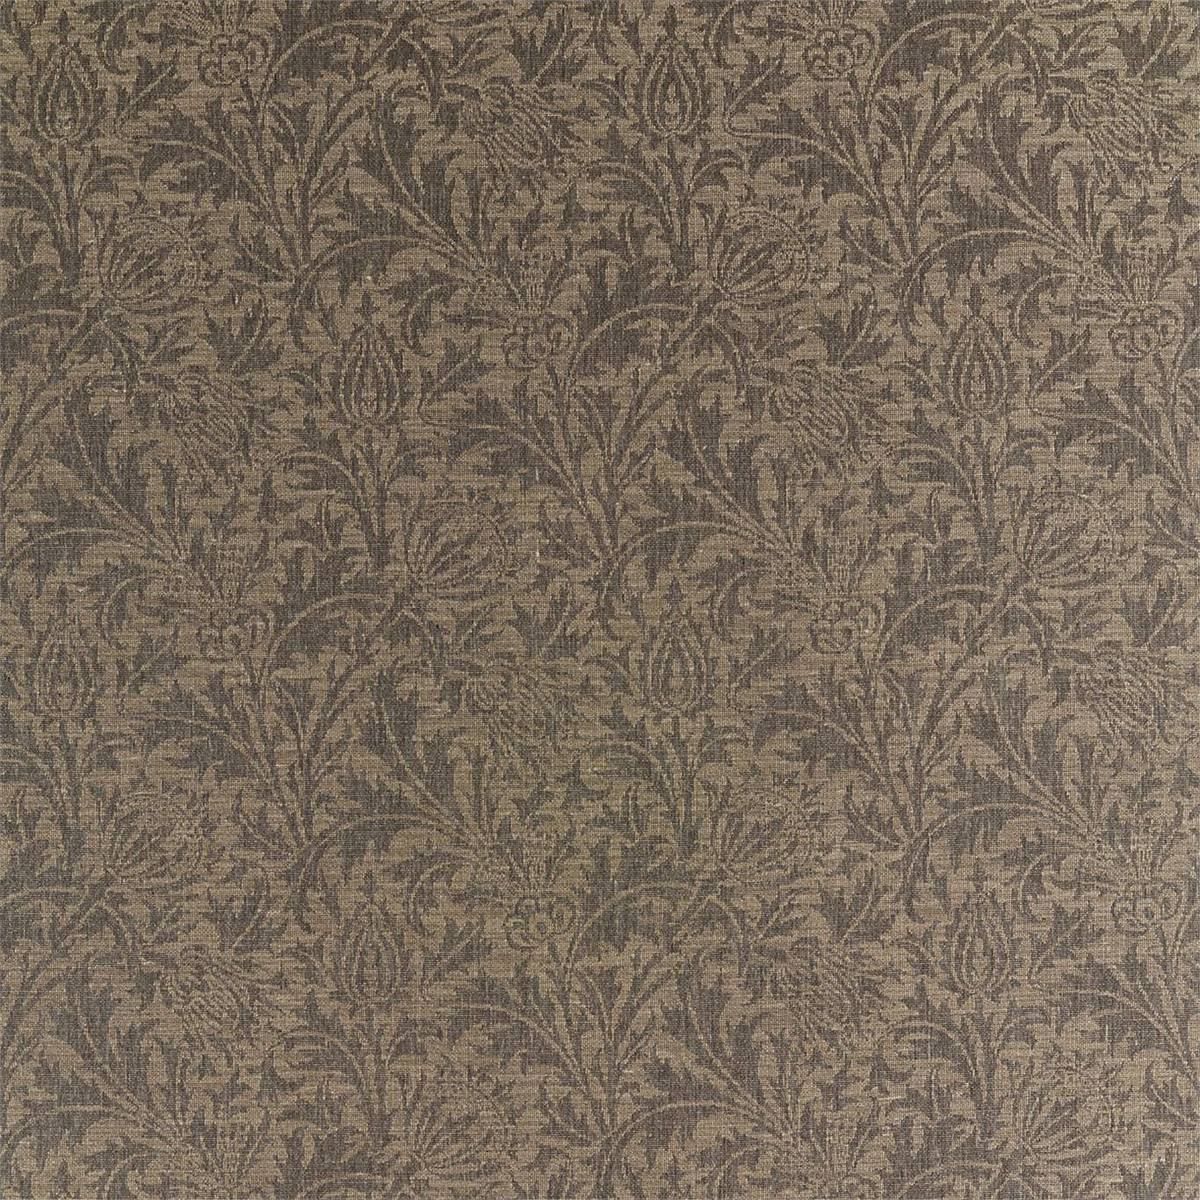 Thistle Weave Flint Fabric by William Morris & Co.